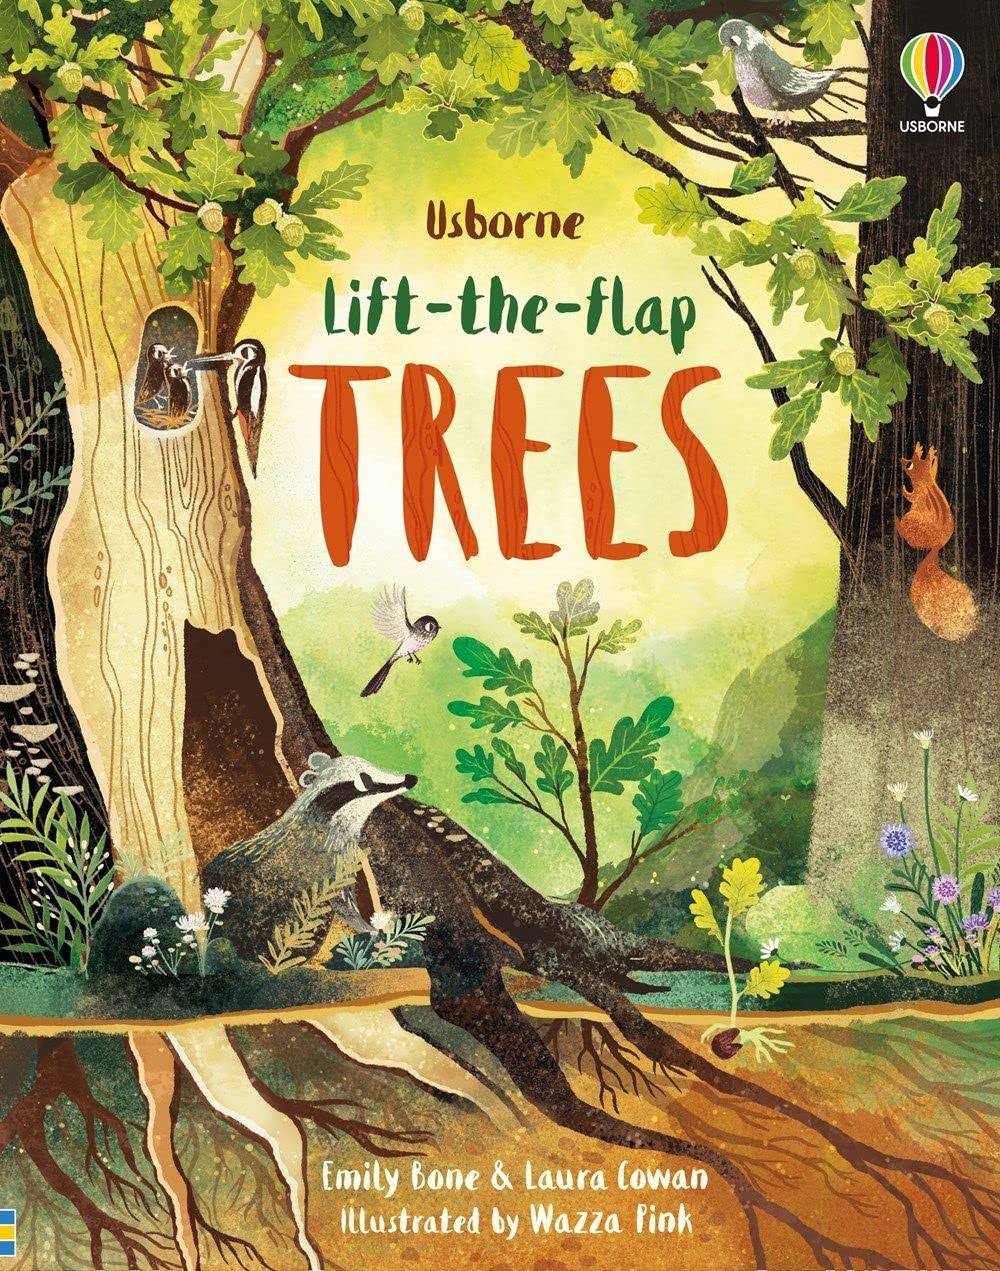 Lift-the-flap Trees [Book]